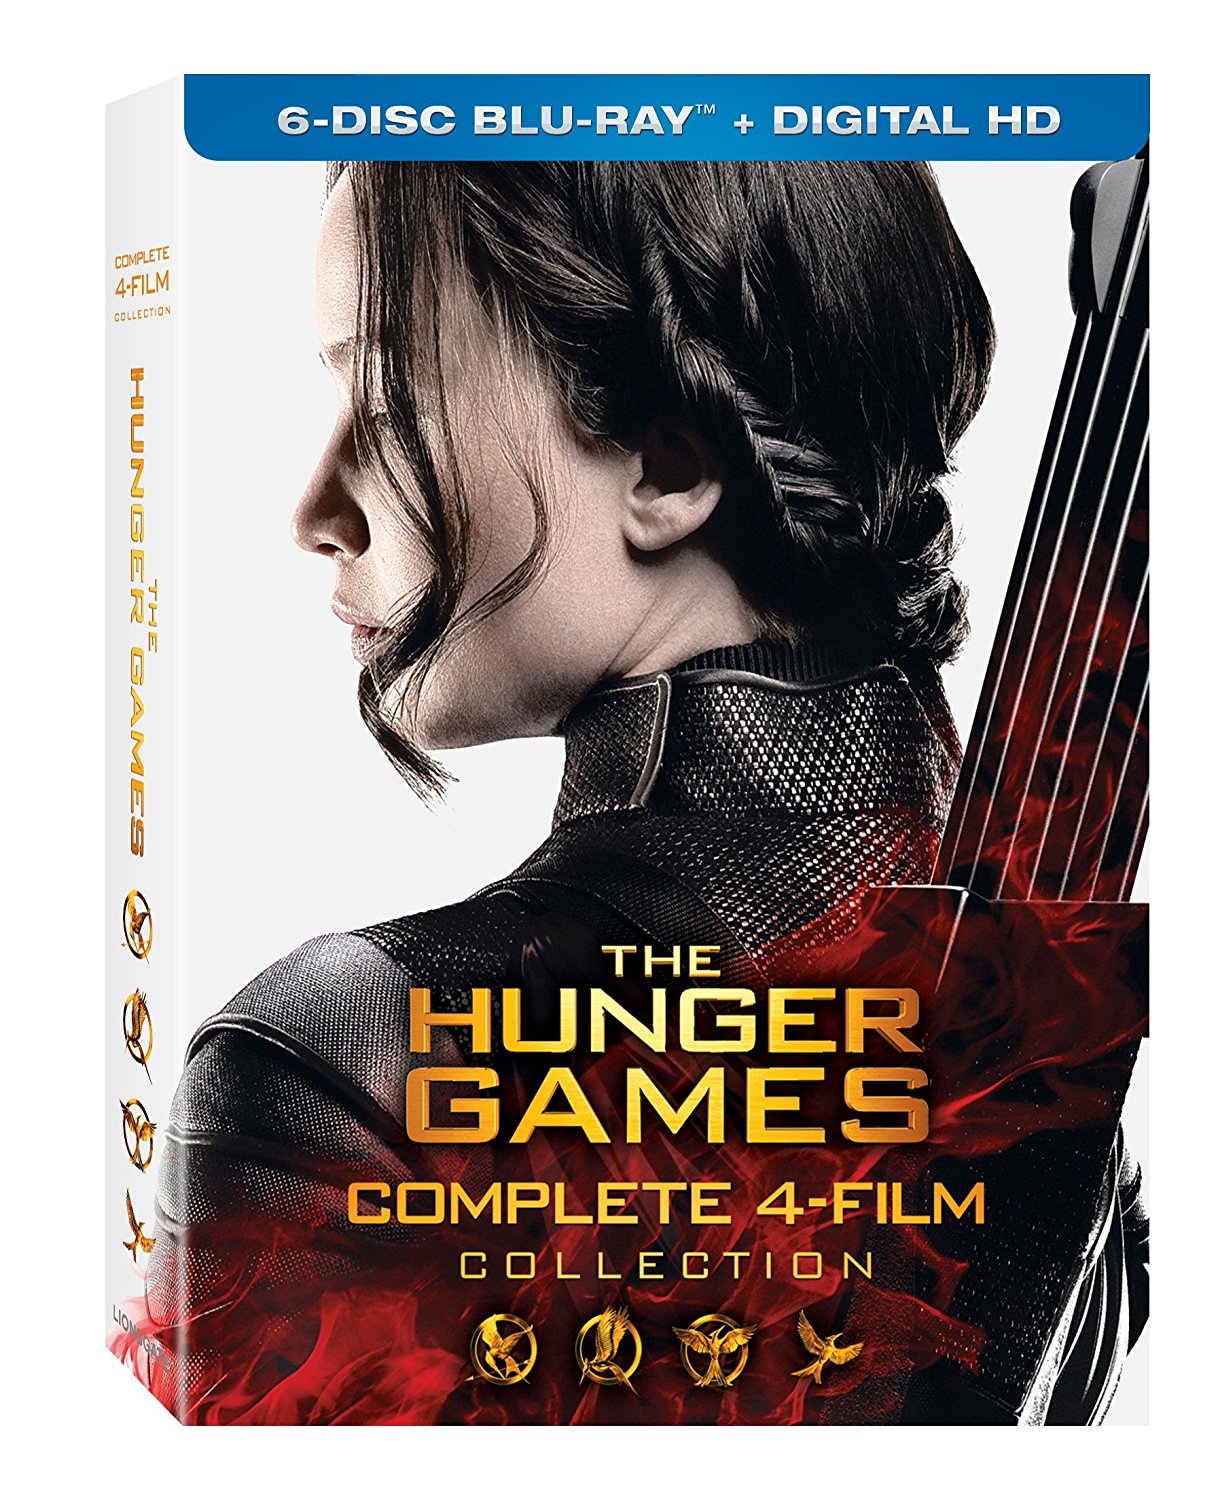 Today only: The Hunger Games complete 4-film collection for $20